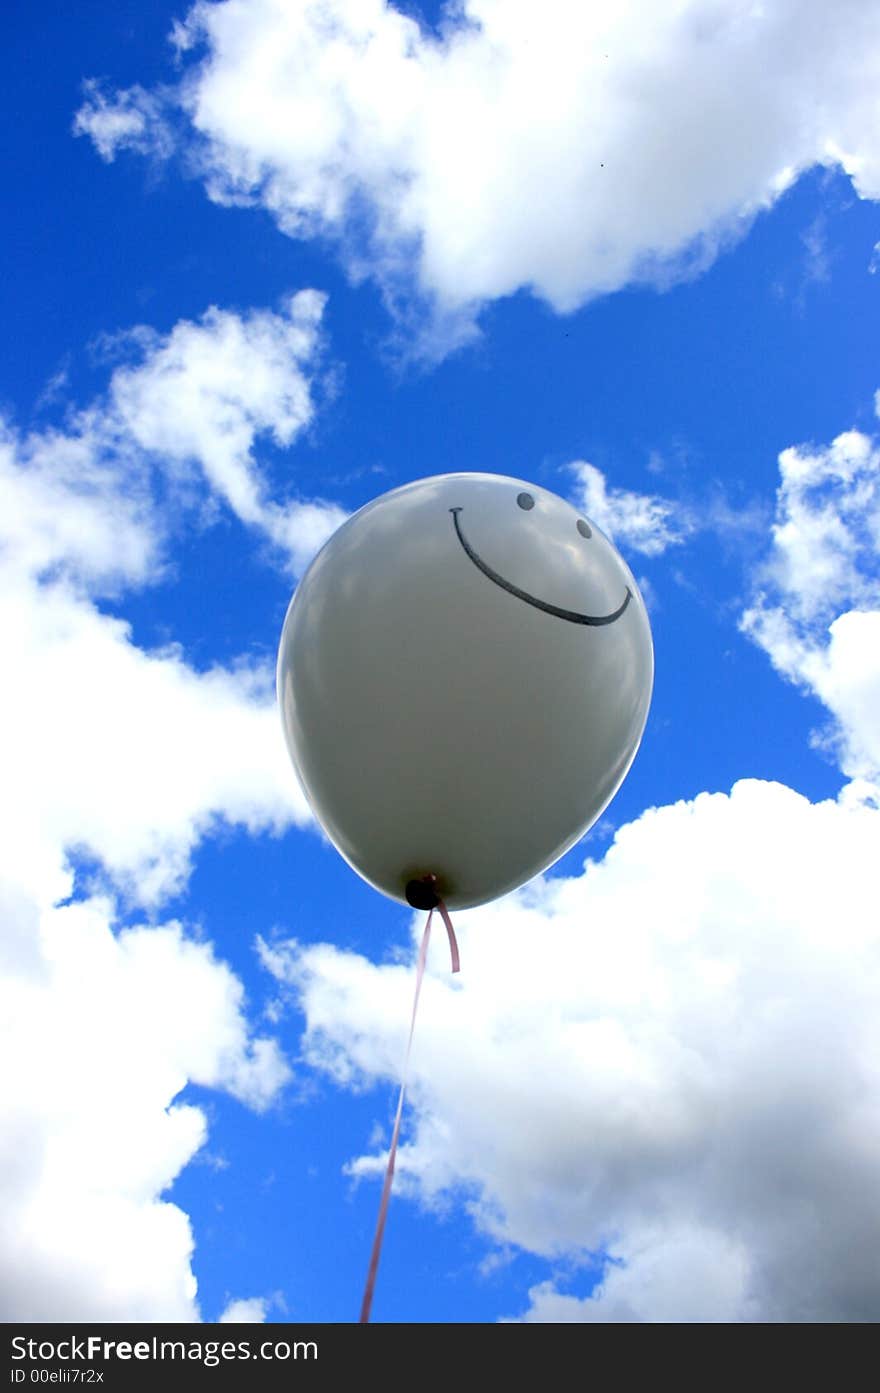 Balloon with smiley face against blue sky with clouds. Balloon with smiley face against blue sky with clouds.